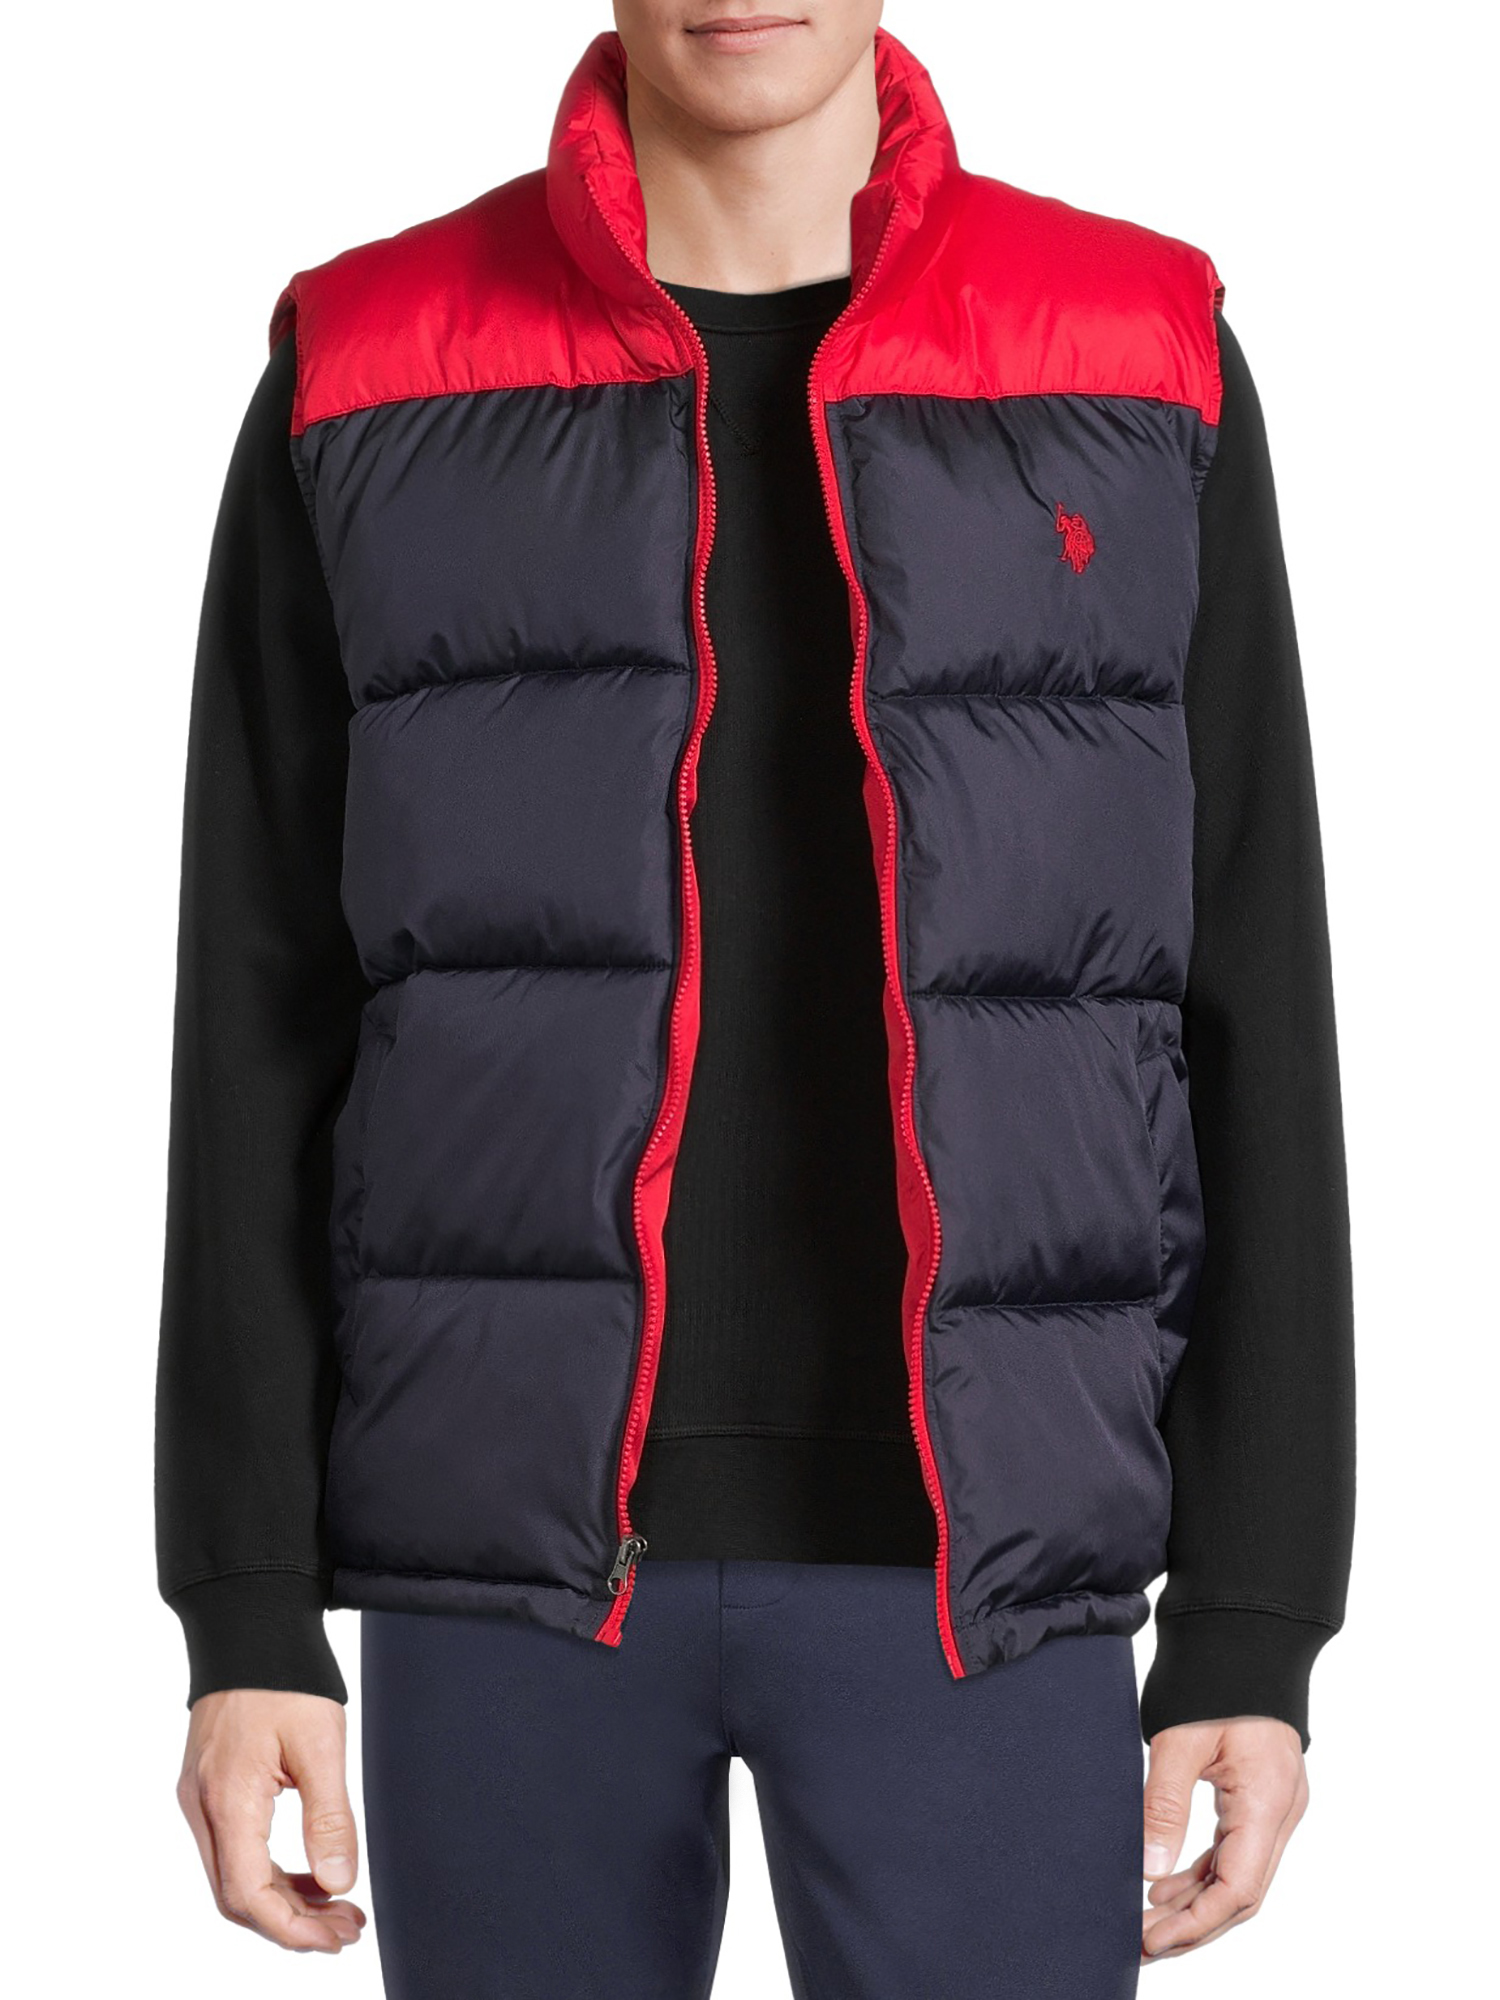 U.S. Polo Assn. Puffer Vest - image 1 of 6